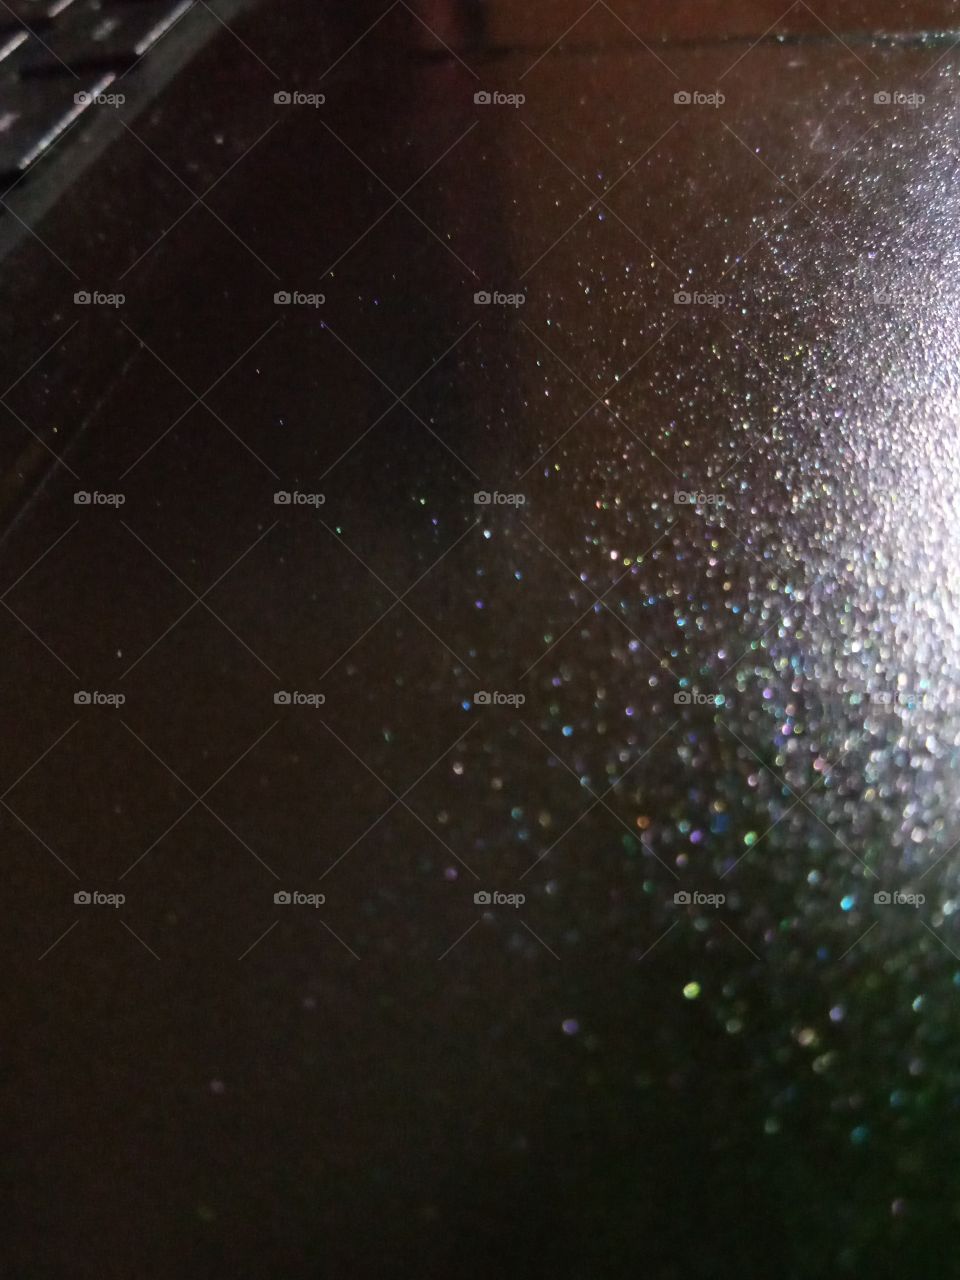 Lights effect on dust particles